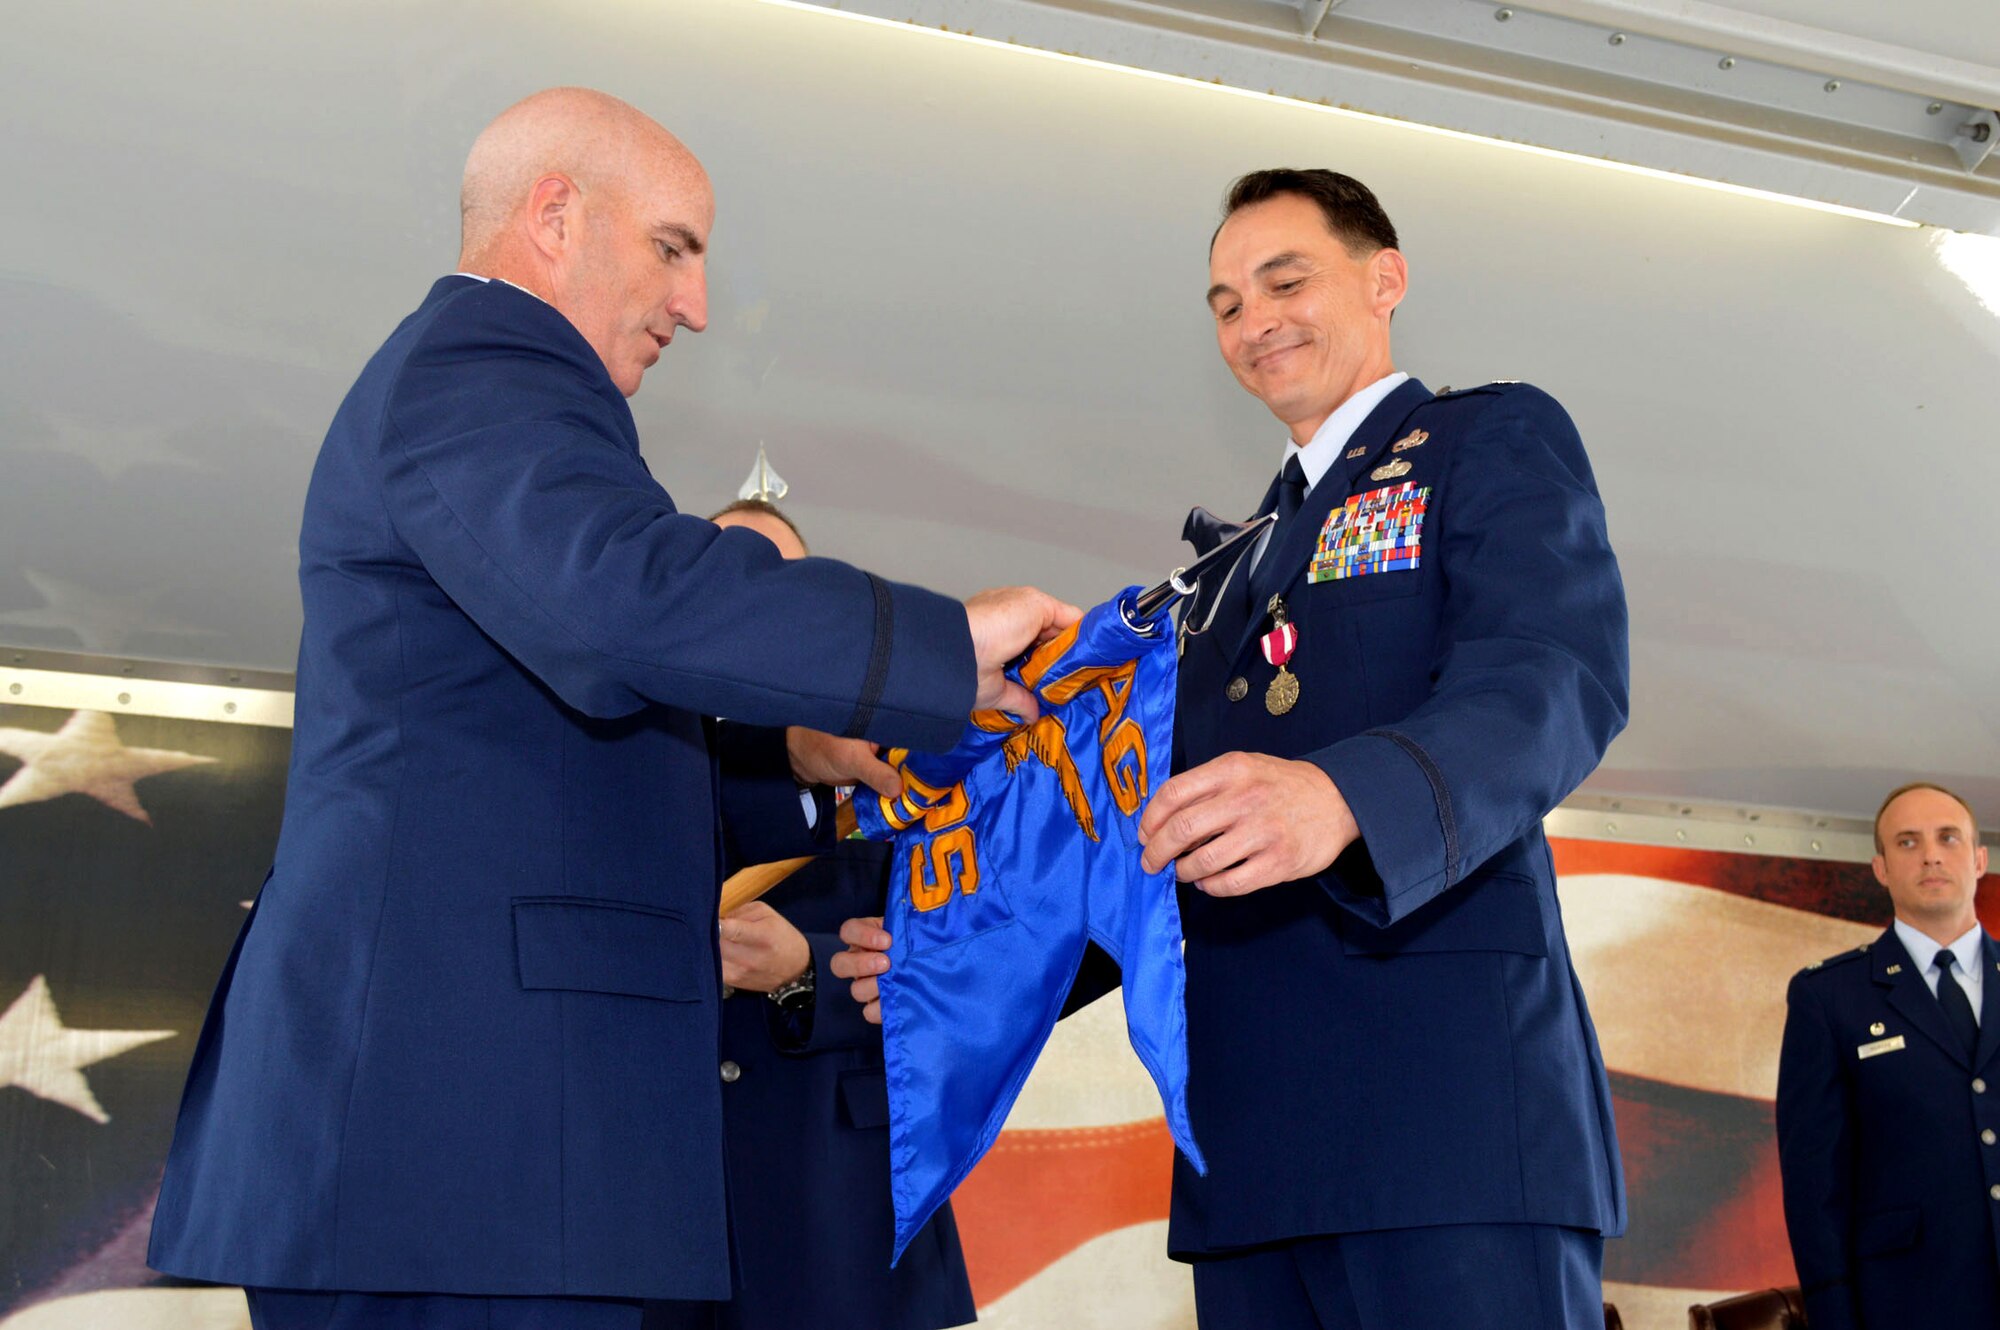 Lt. Col. Joseph Whittington Jr., 3rd Aerial Port Squadron commander, right, and Col. Kenneth Moss, 43rd Airlift Group commander, case the 3rd APS guidon during the 43rd Air Mobility Squadron activation ceremony July 1, 2015, at Pope Army Airfield, North Carolina. Aircraft maintenance and aerial port Airmen and functions transferred to the newly established 43rd AMS from the inactivated 3 APS and the 43rd Aircraft Maintenance Squadron. (U.S. Air Force photo/Marvin Krause)